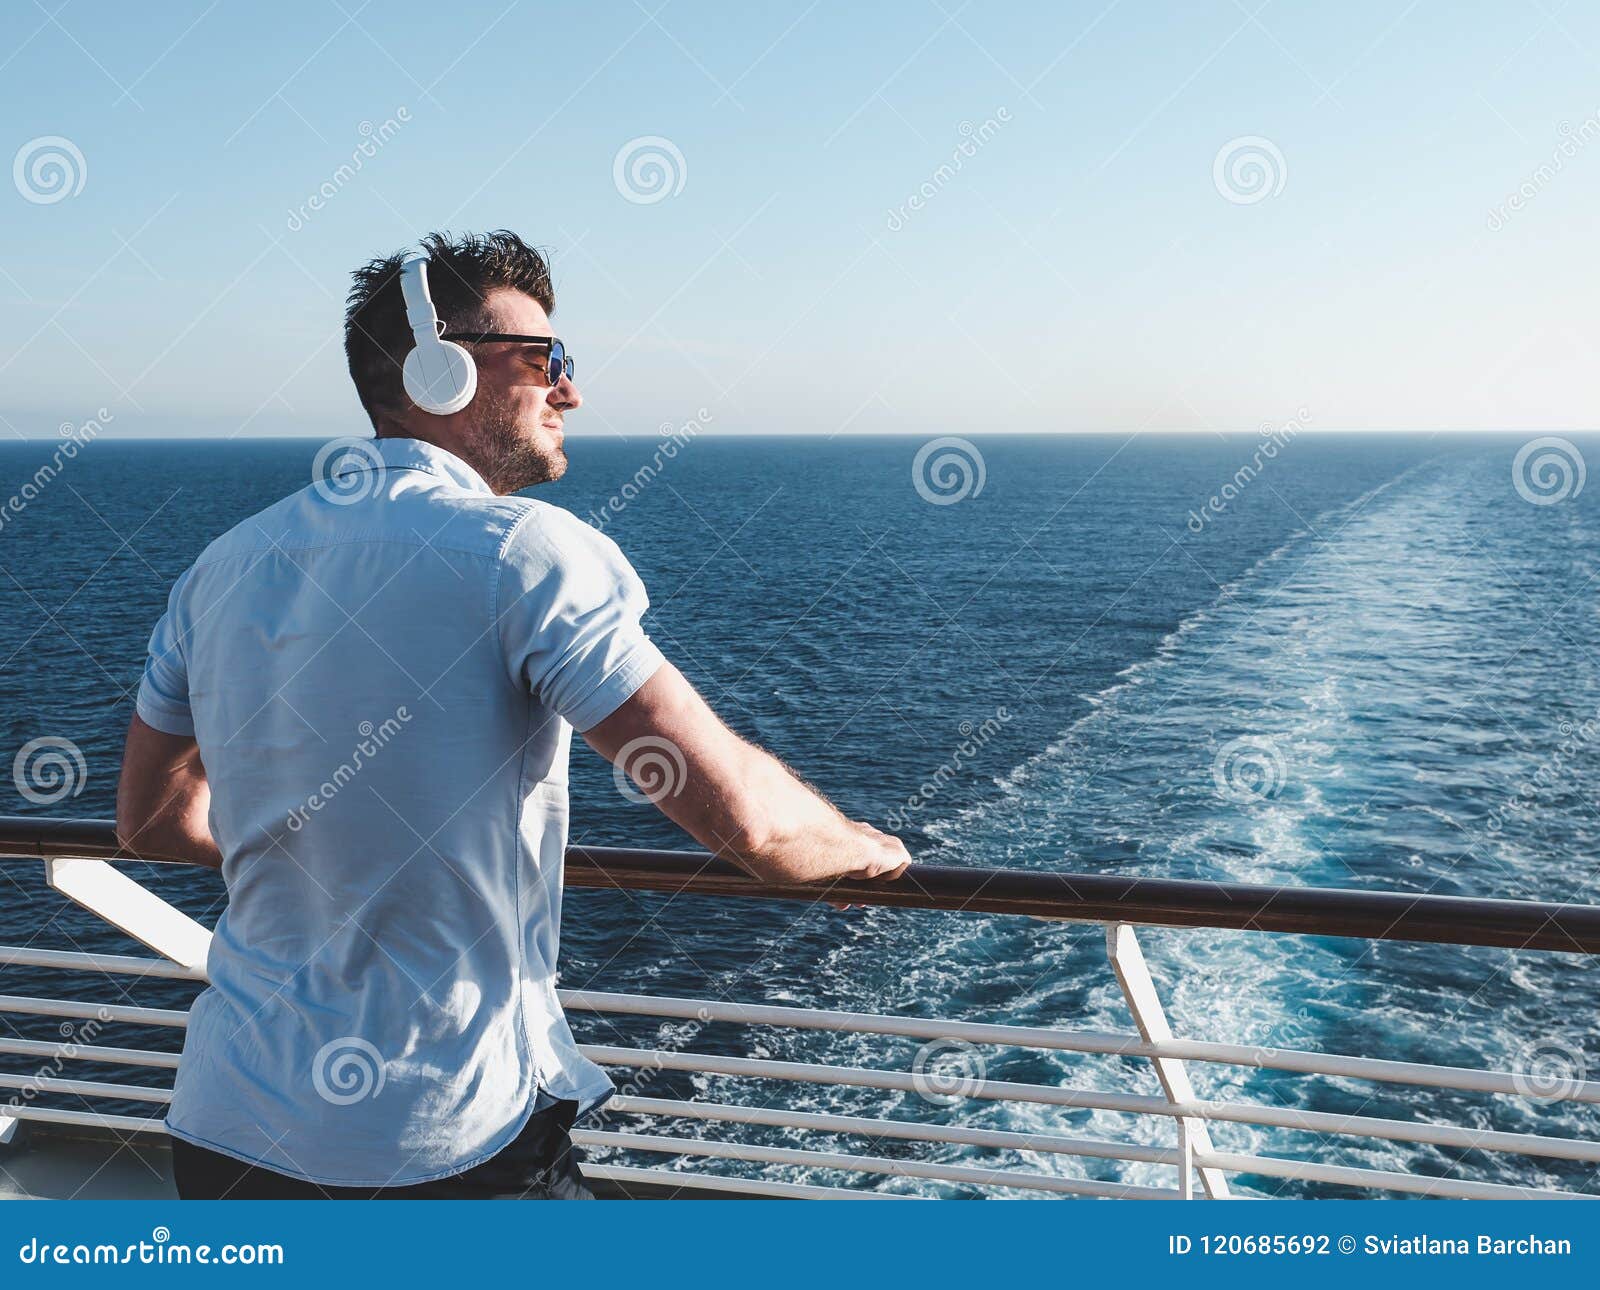 only man on cruise ship